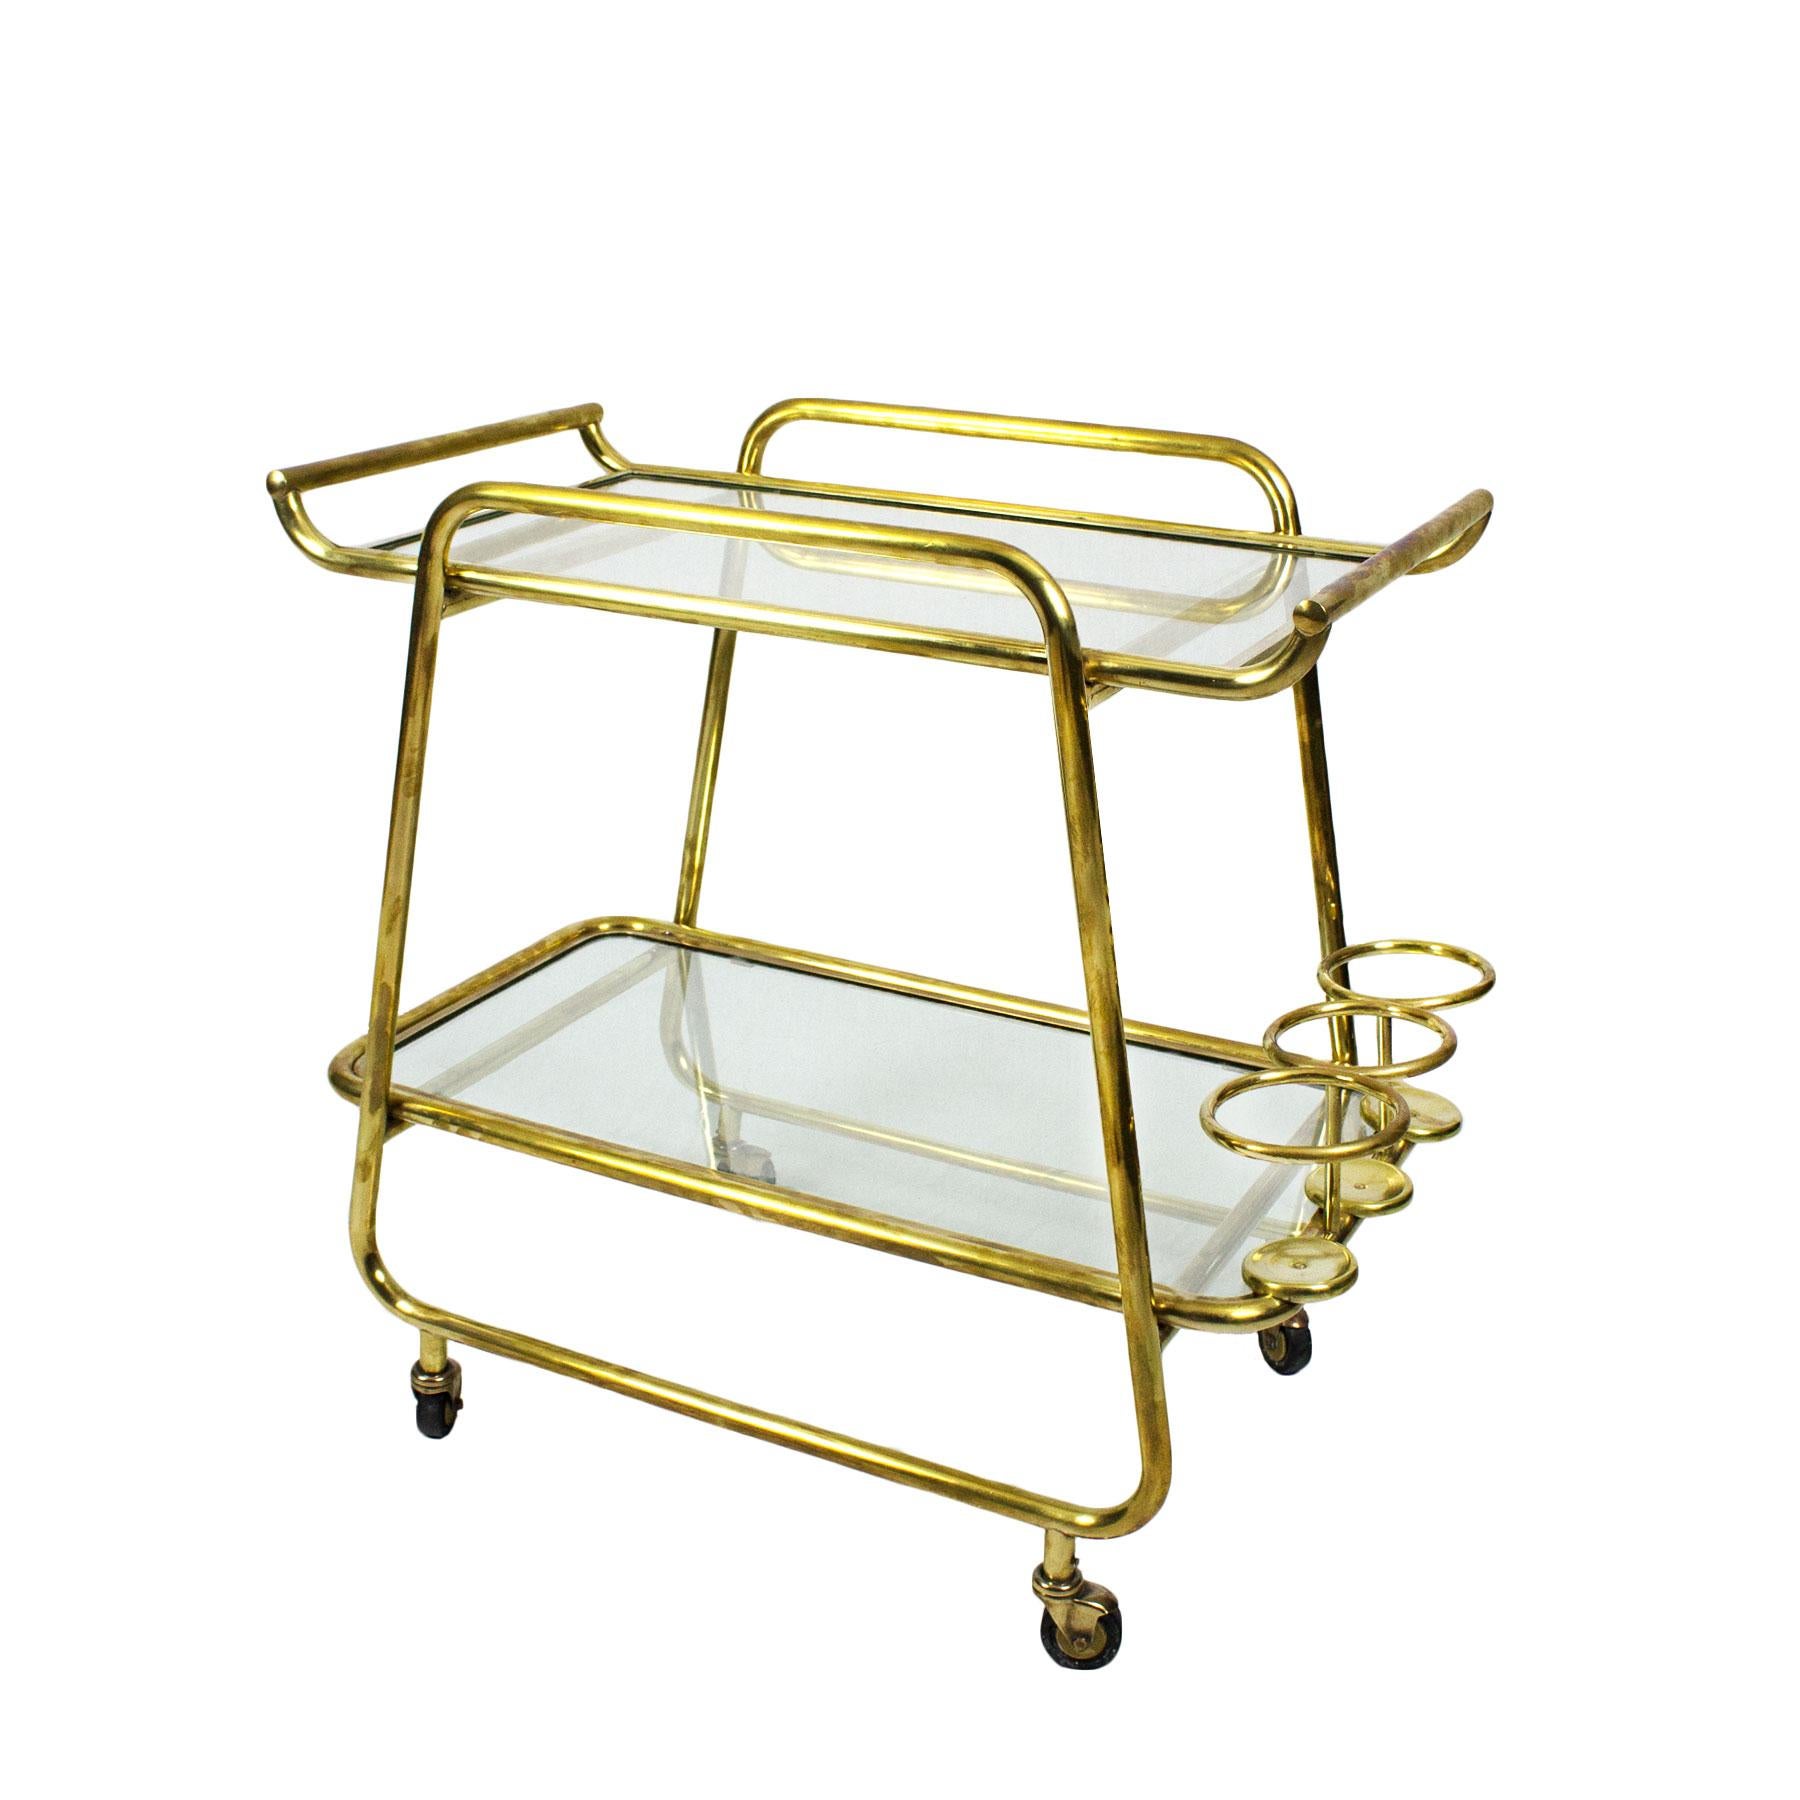 1930s Art Deco Bar Cart, Polished Brass and Glass, Bottles Rack, Italy 1